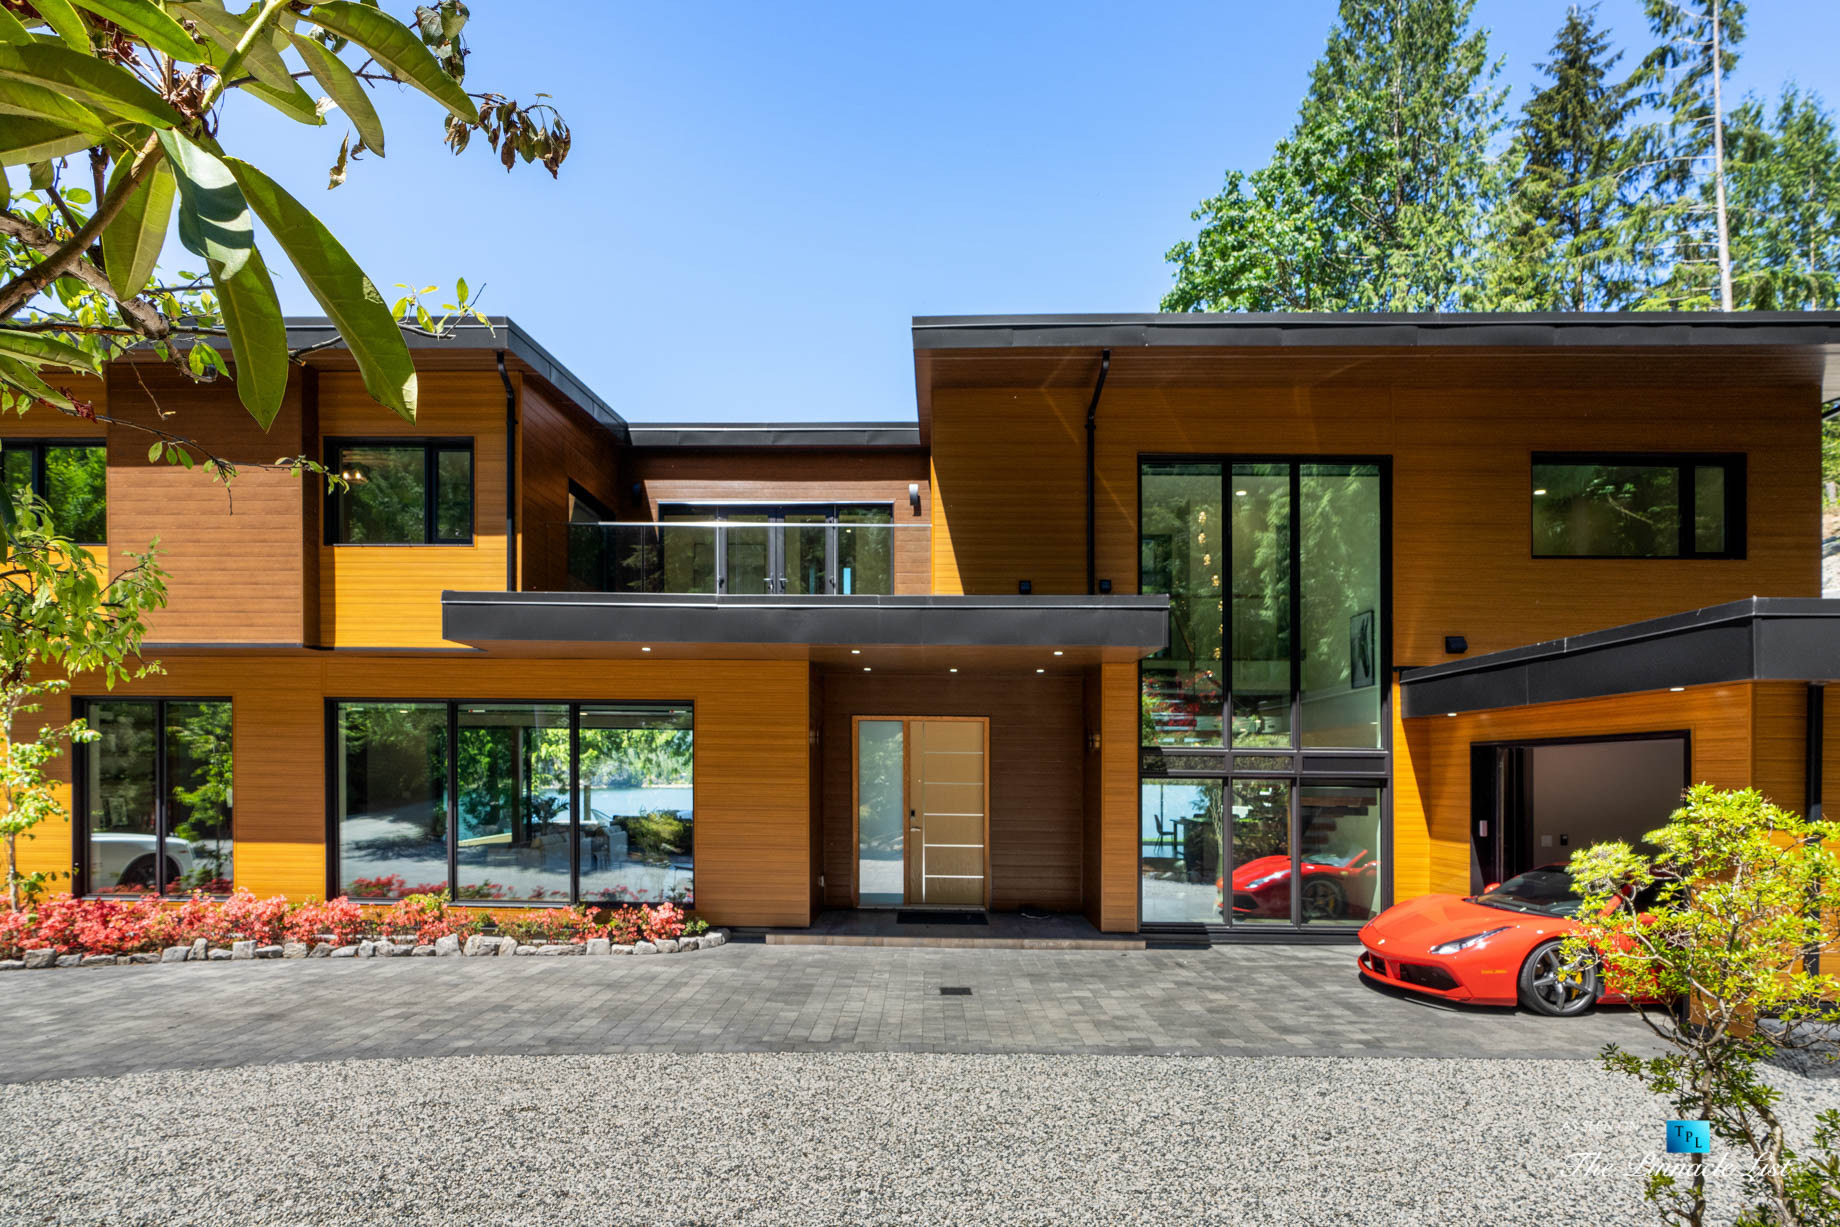 3350 Watson Rd, Belcarra, BC, Canada - Vancouver Luxury Real Estate - Modern Oceanfront Mansion with Red Ferrari